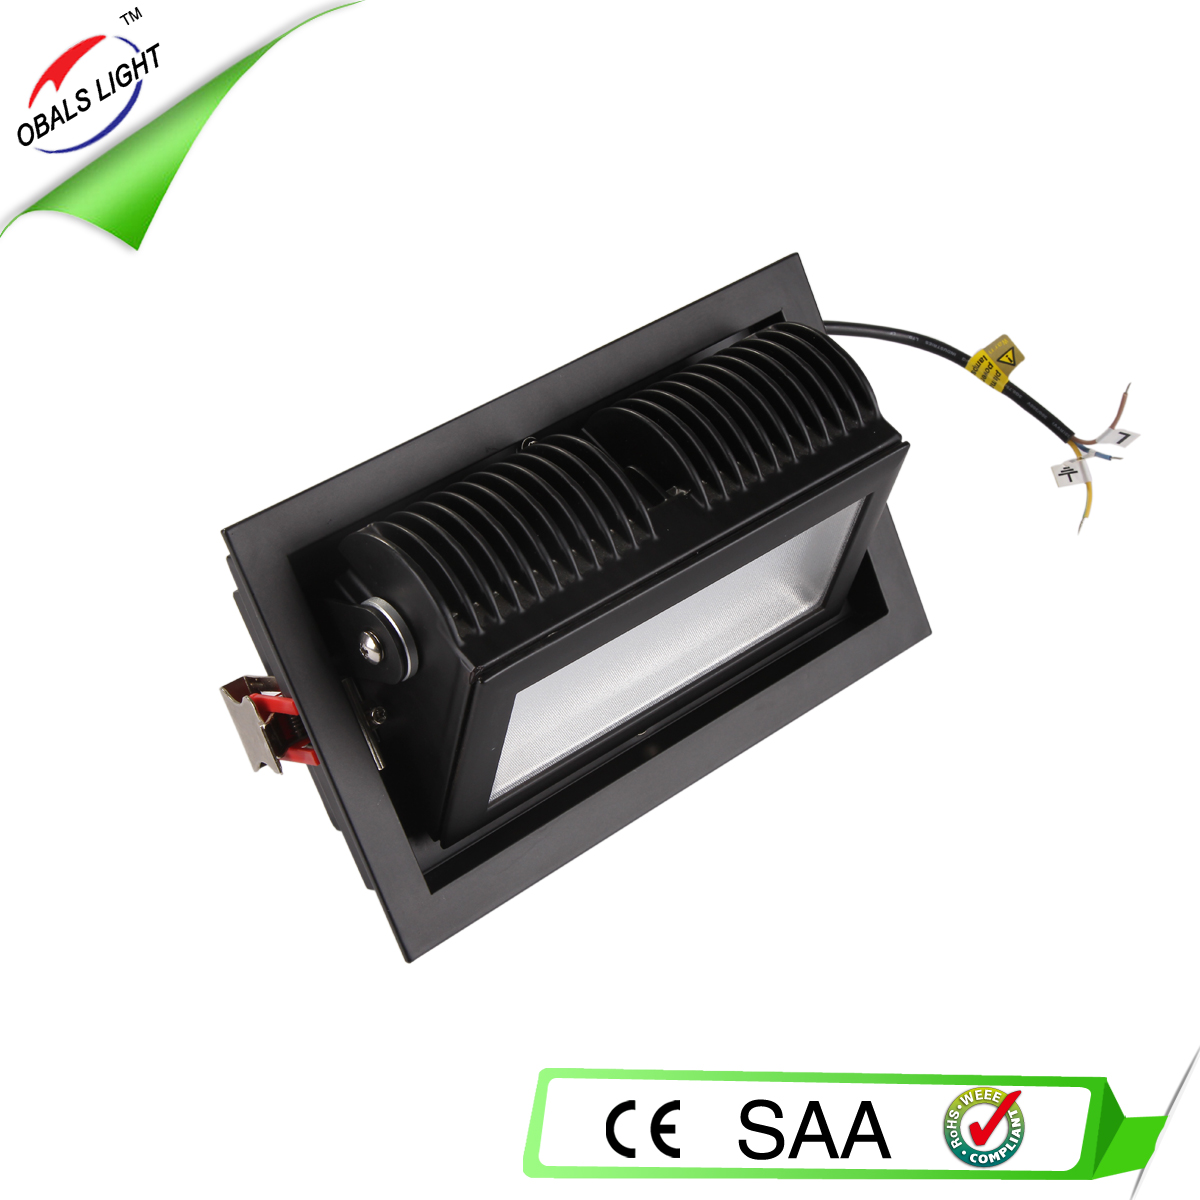 48W Adjustable recessed led spot light SMD CE ROHS SAA approved